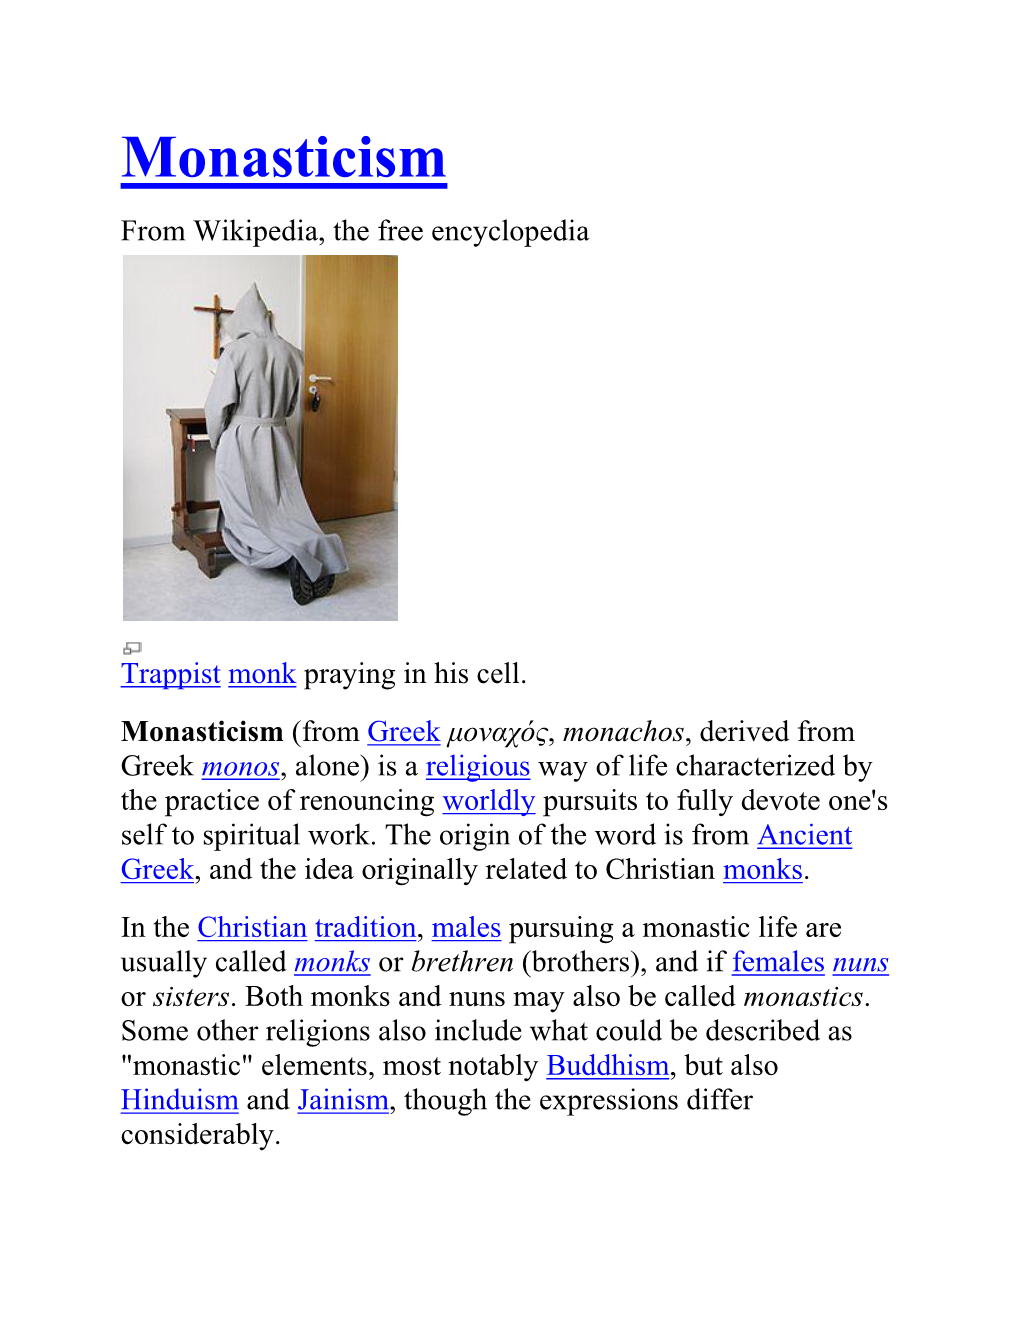 Monasticism from Wikipedia, the Free Encyclopedia